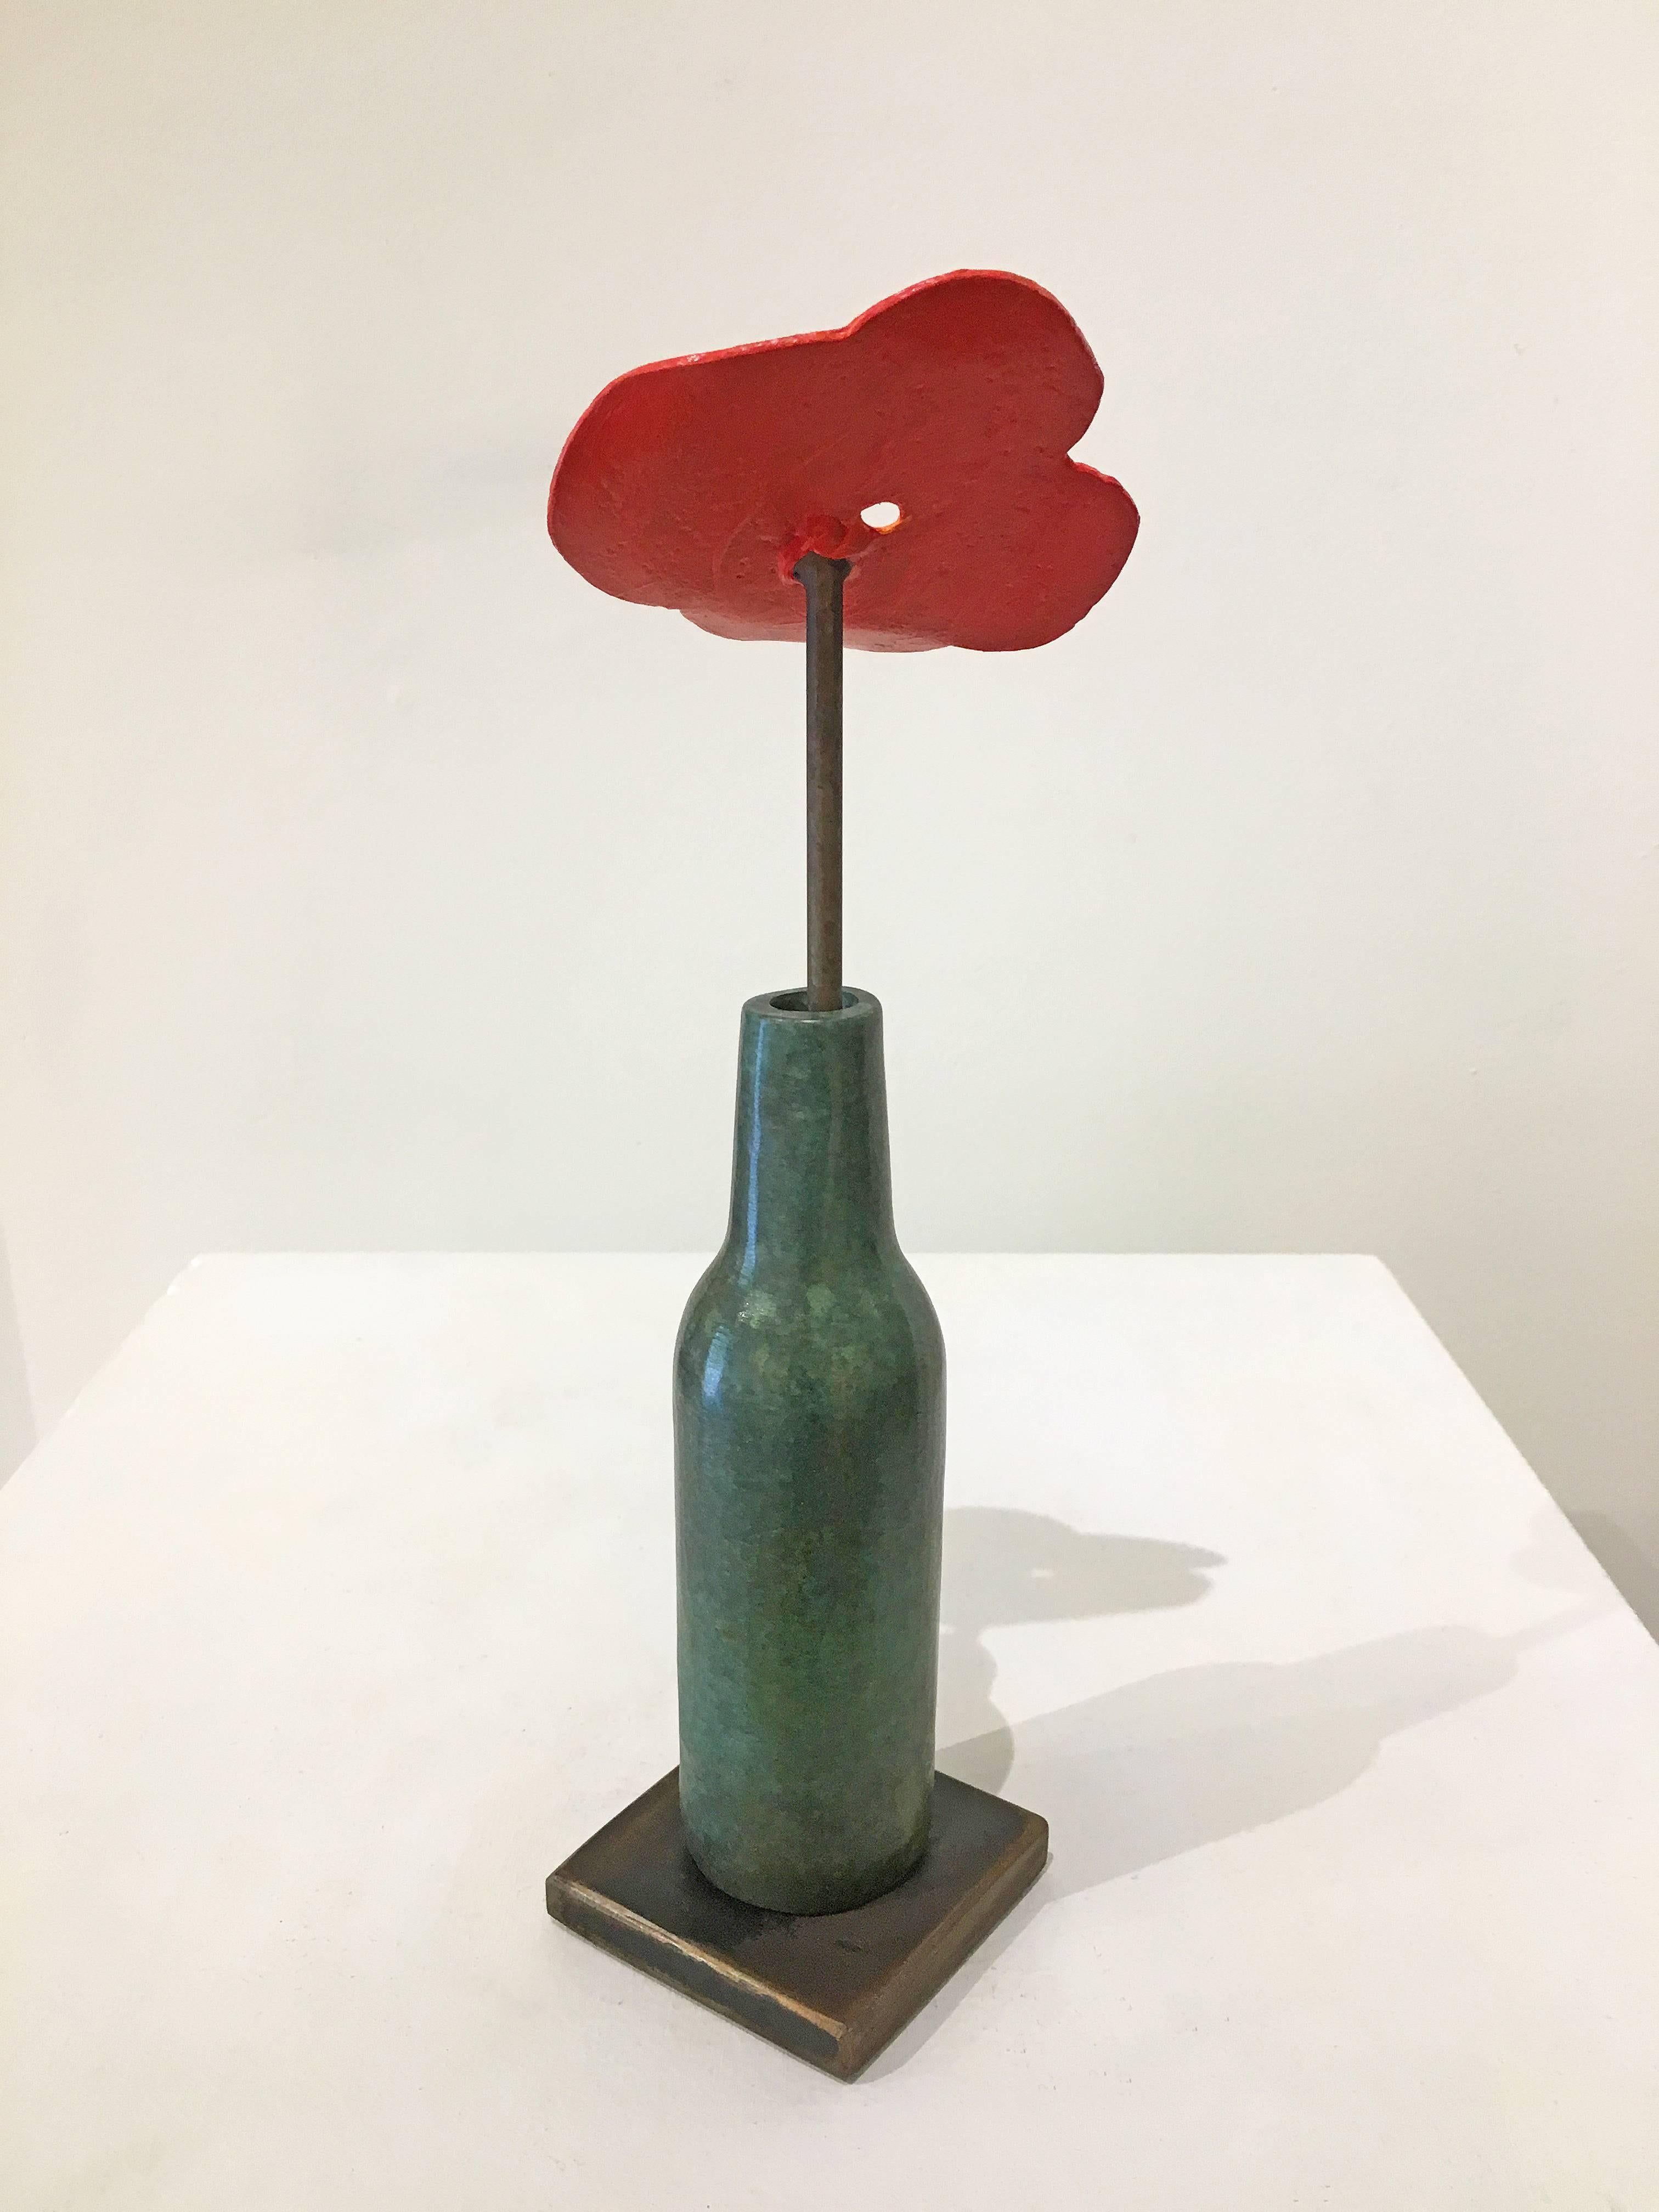 Poppy - Sculpture by David Kimball Anderson